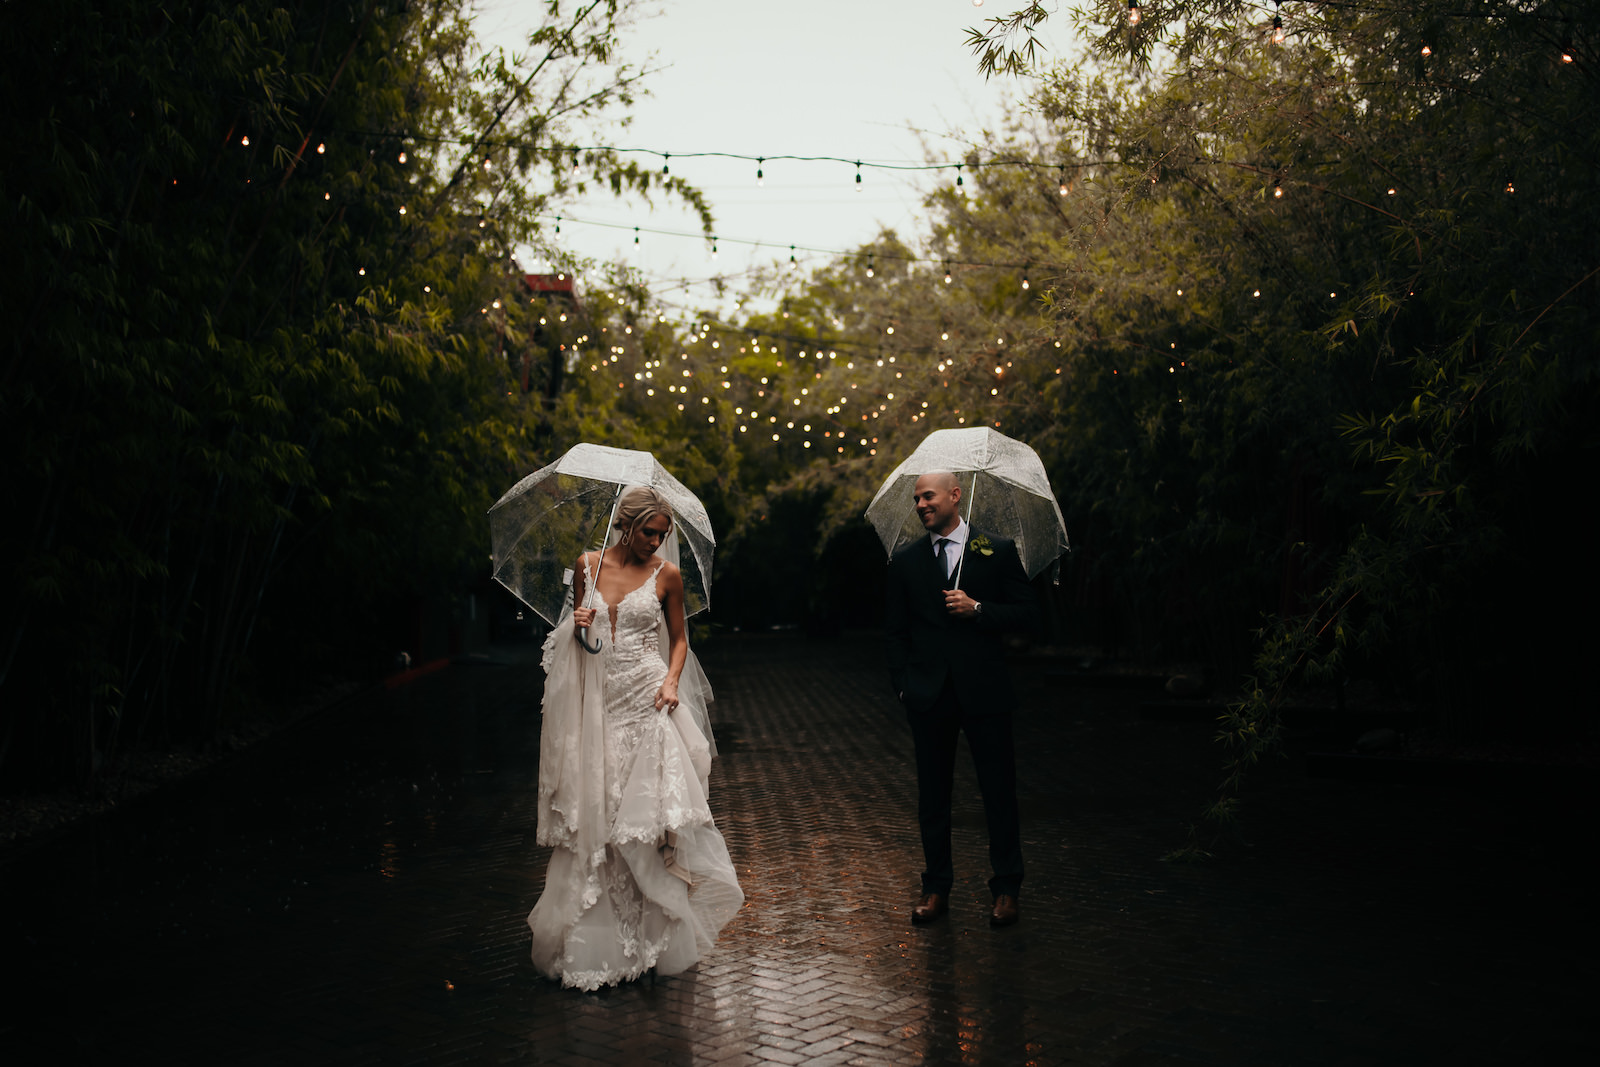 Editorial Inspired Wedding Portrait, Tampa Bay Bride and Groom in Enchanted Brick Paved Courtyard with String-lighting and Bamboo, While Raining, Holding Clear Umbrellas | Unique Florida Wedding Venue NOVA 535